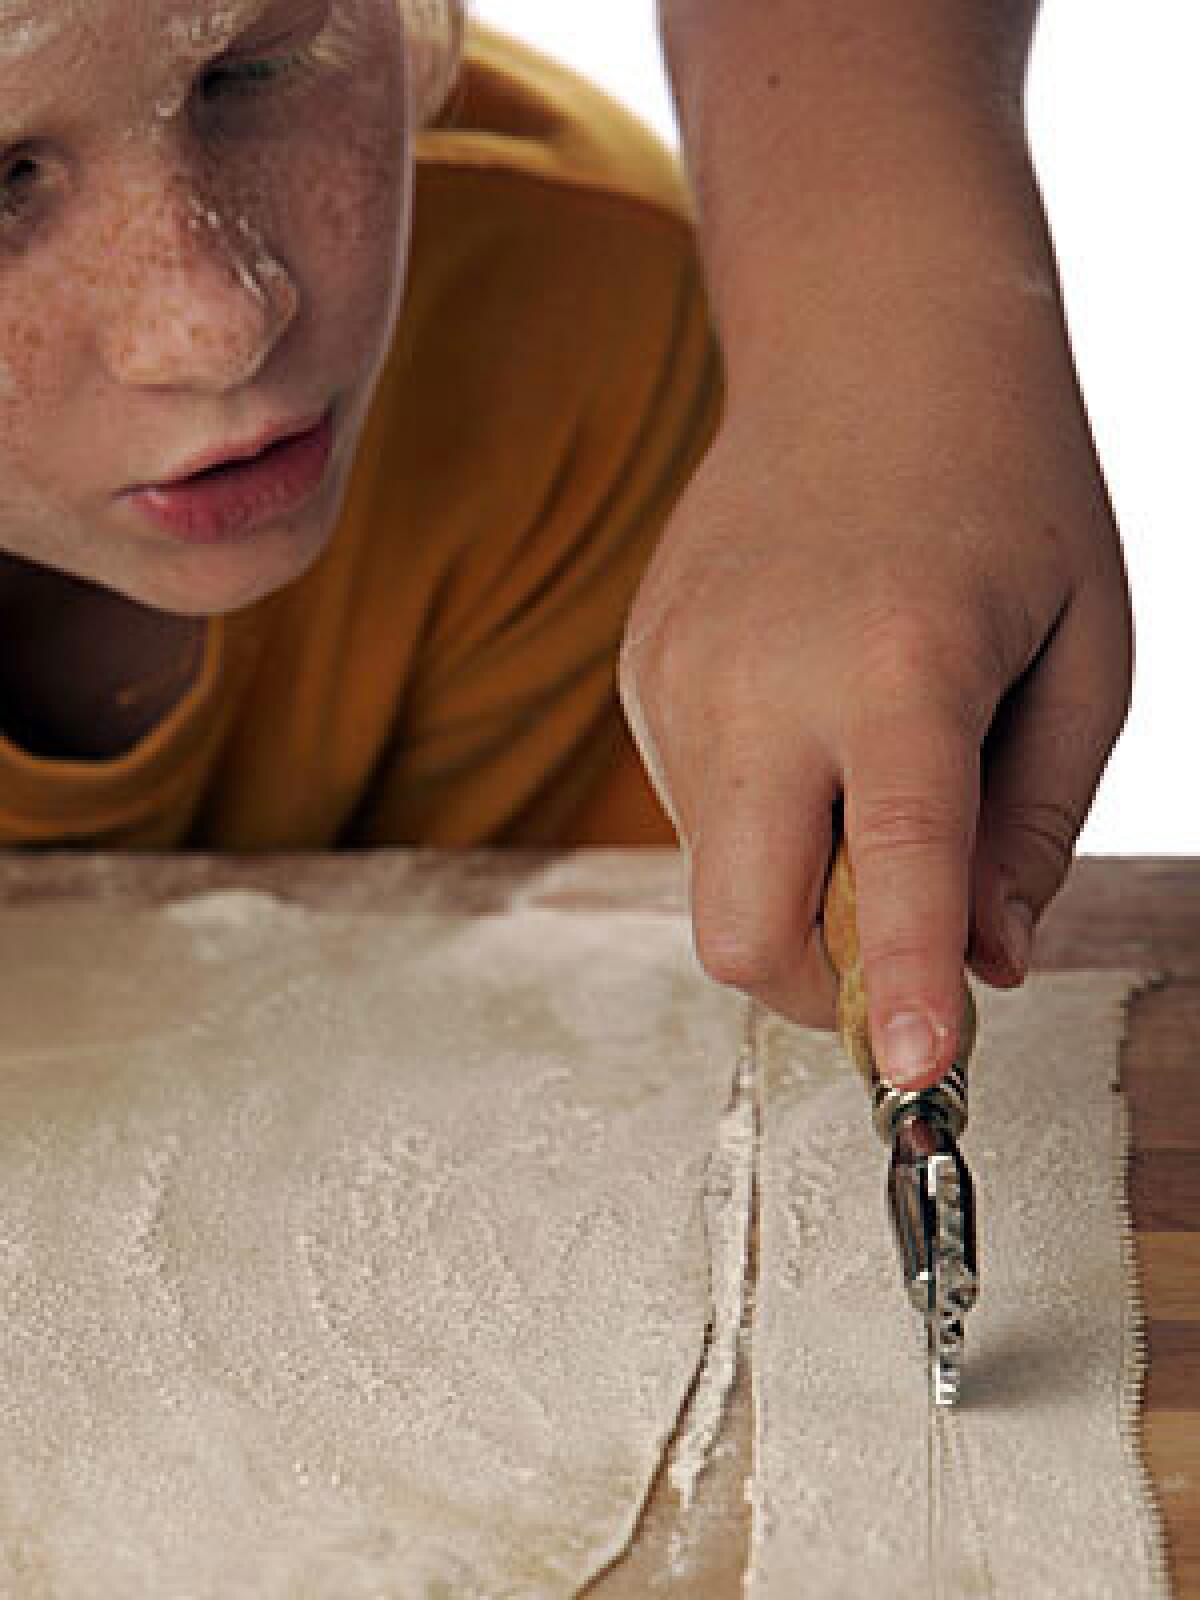 USING THEIR NOODLES: Kneading, rolling, cutting dough. It's a job made for kids.